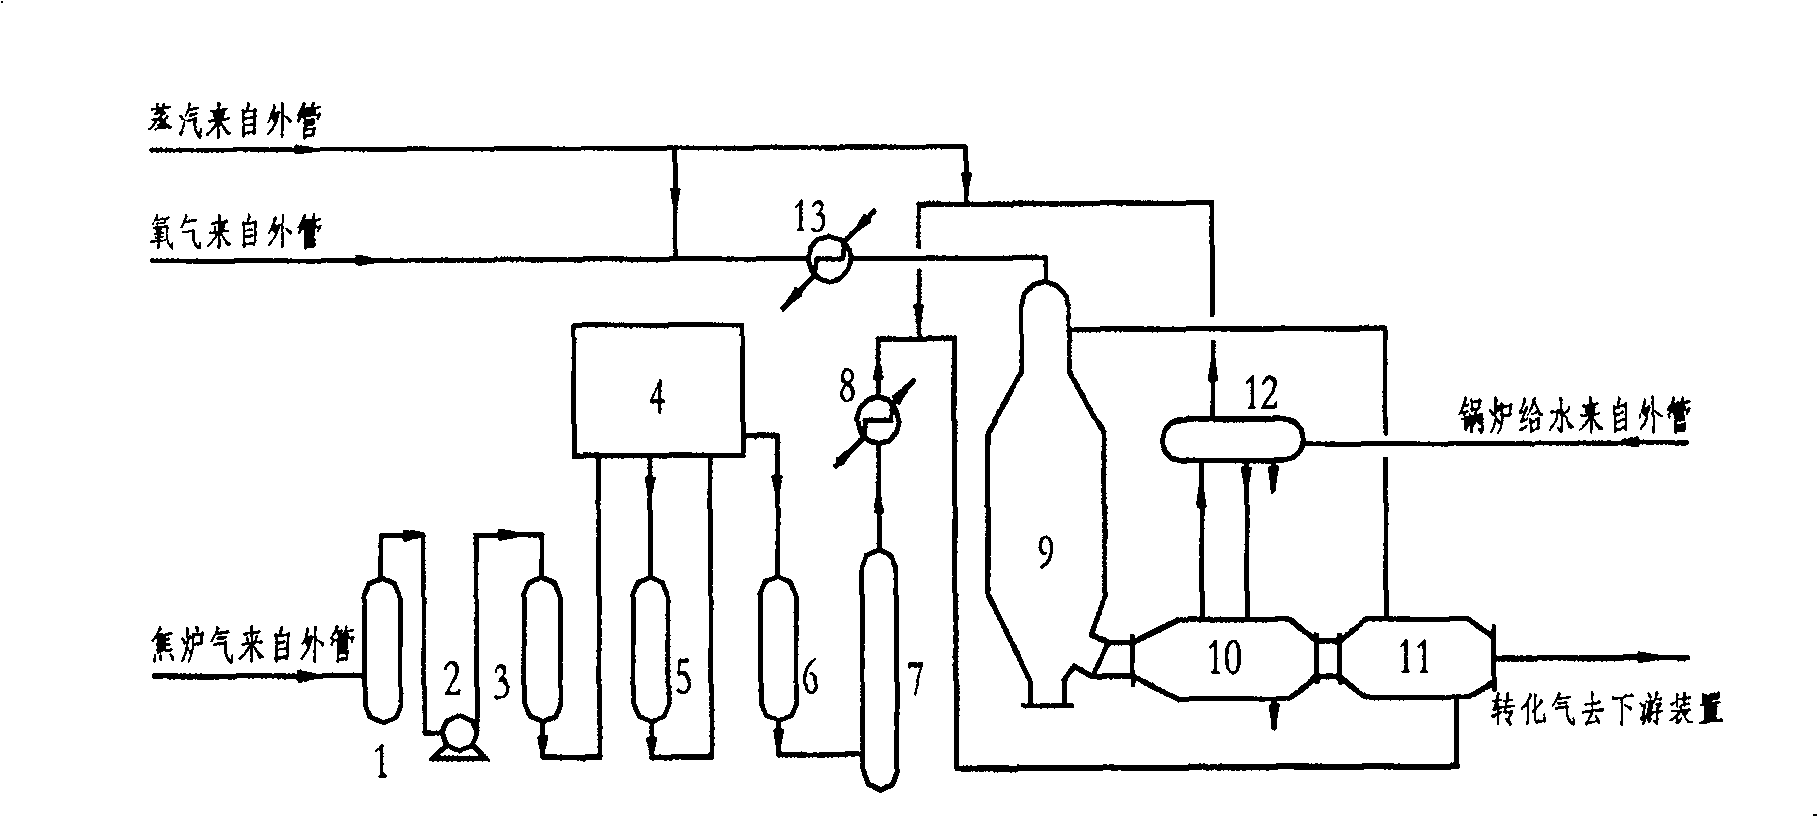 Process for pretreatment of coke oven gas and partial oxidation preparation of synthetic raw gas